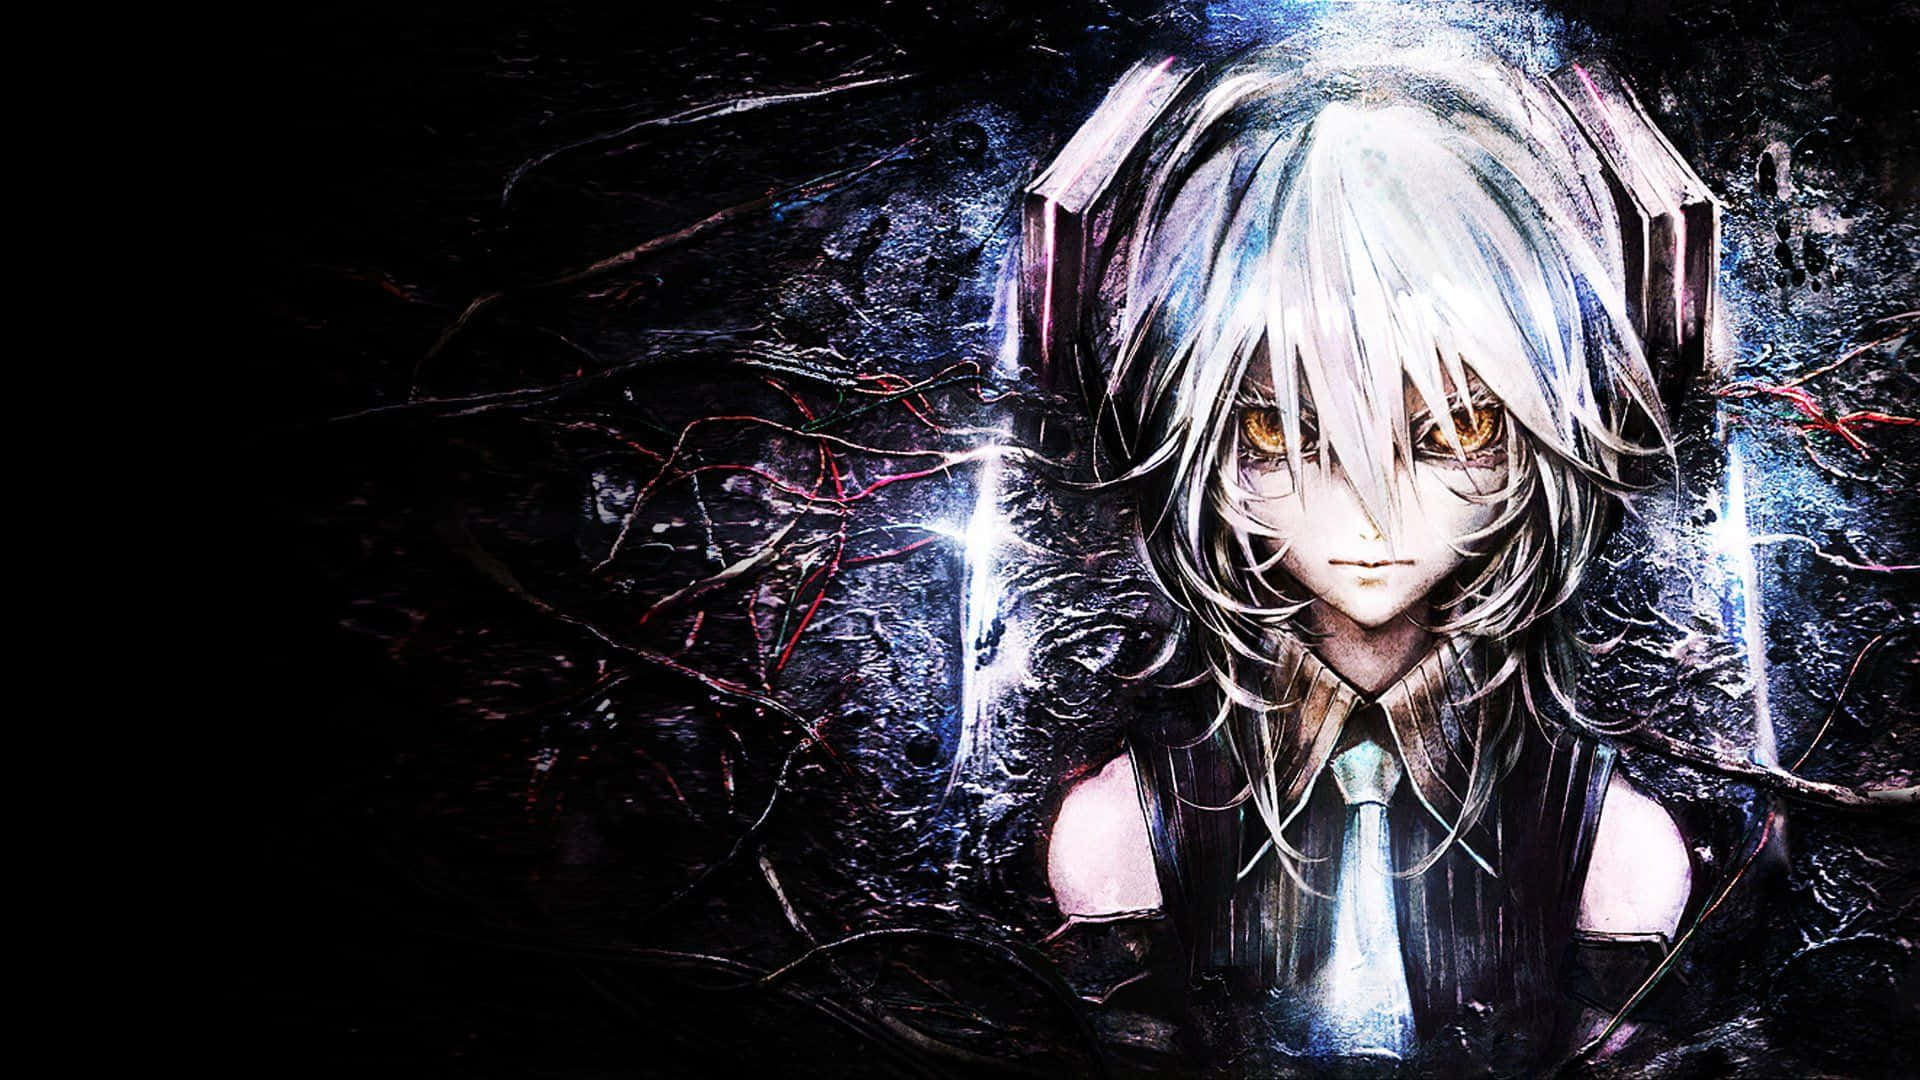 Discover A New World Of Anime Characters With This Stunning Hd Wallpaper! Wallpaper